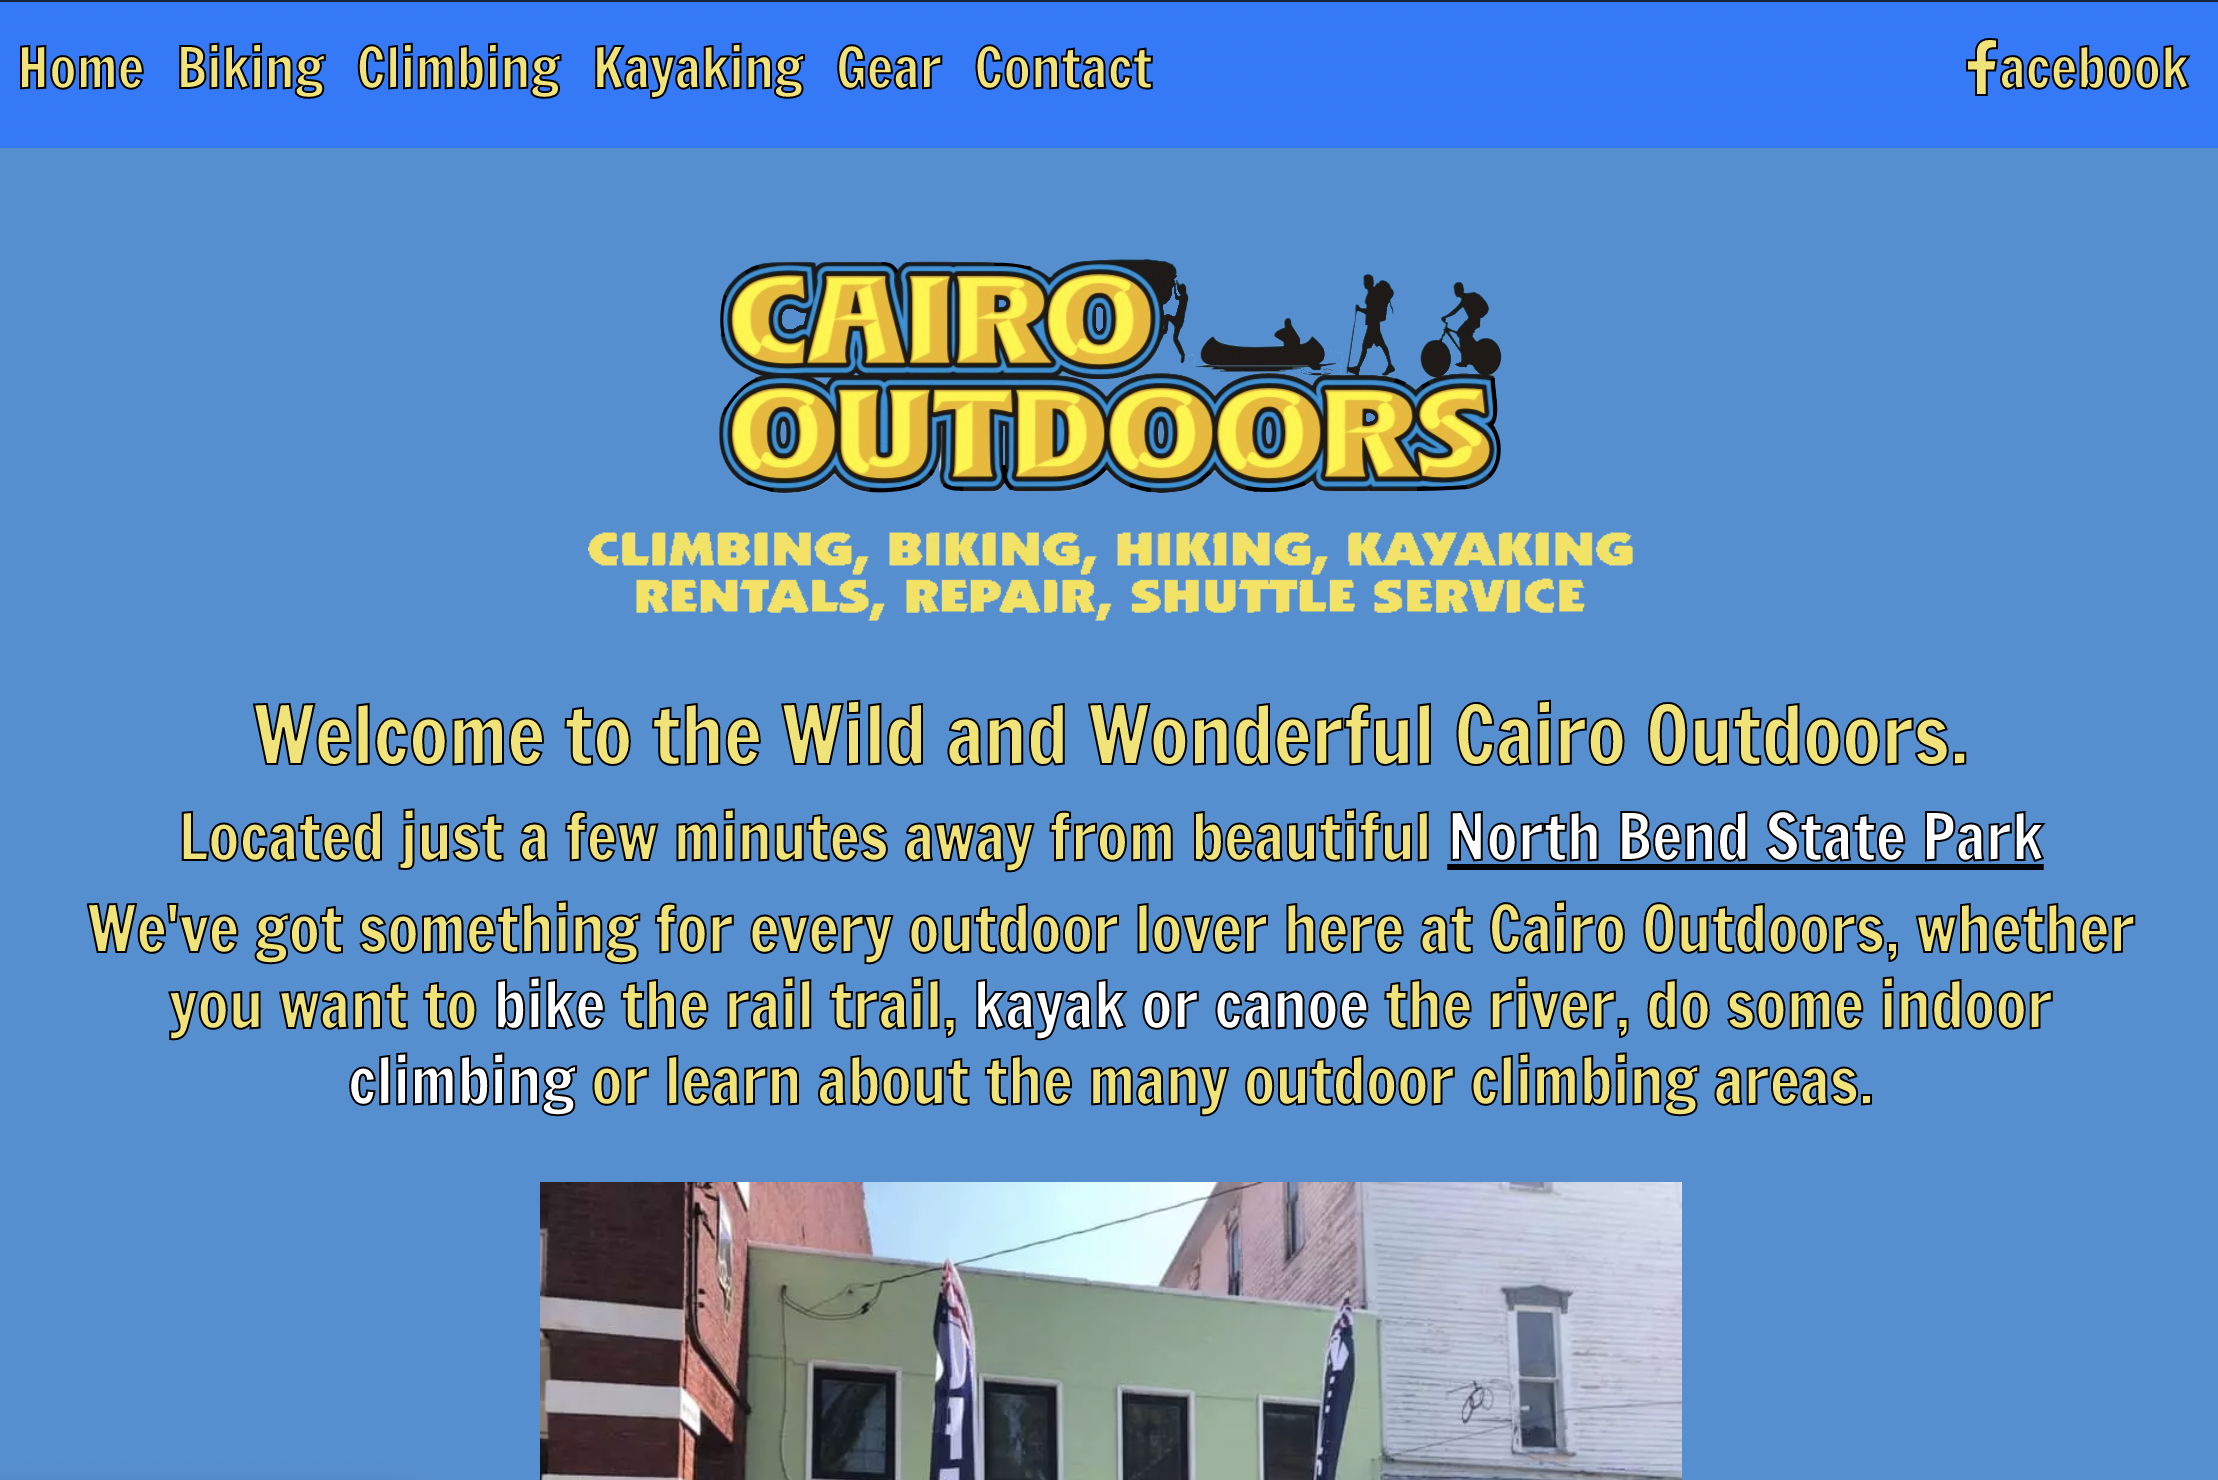 /static/cairo_outdoors/mainPage.png